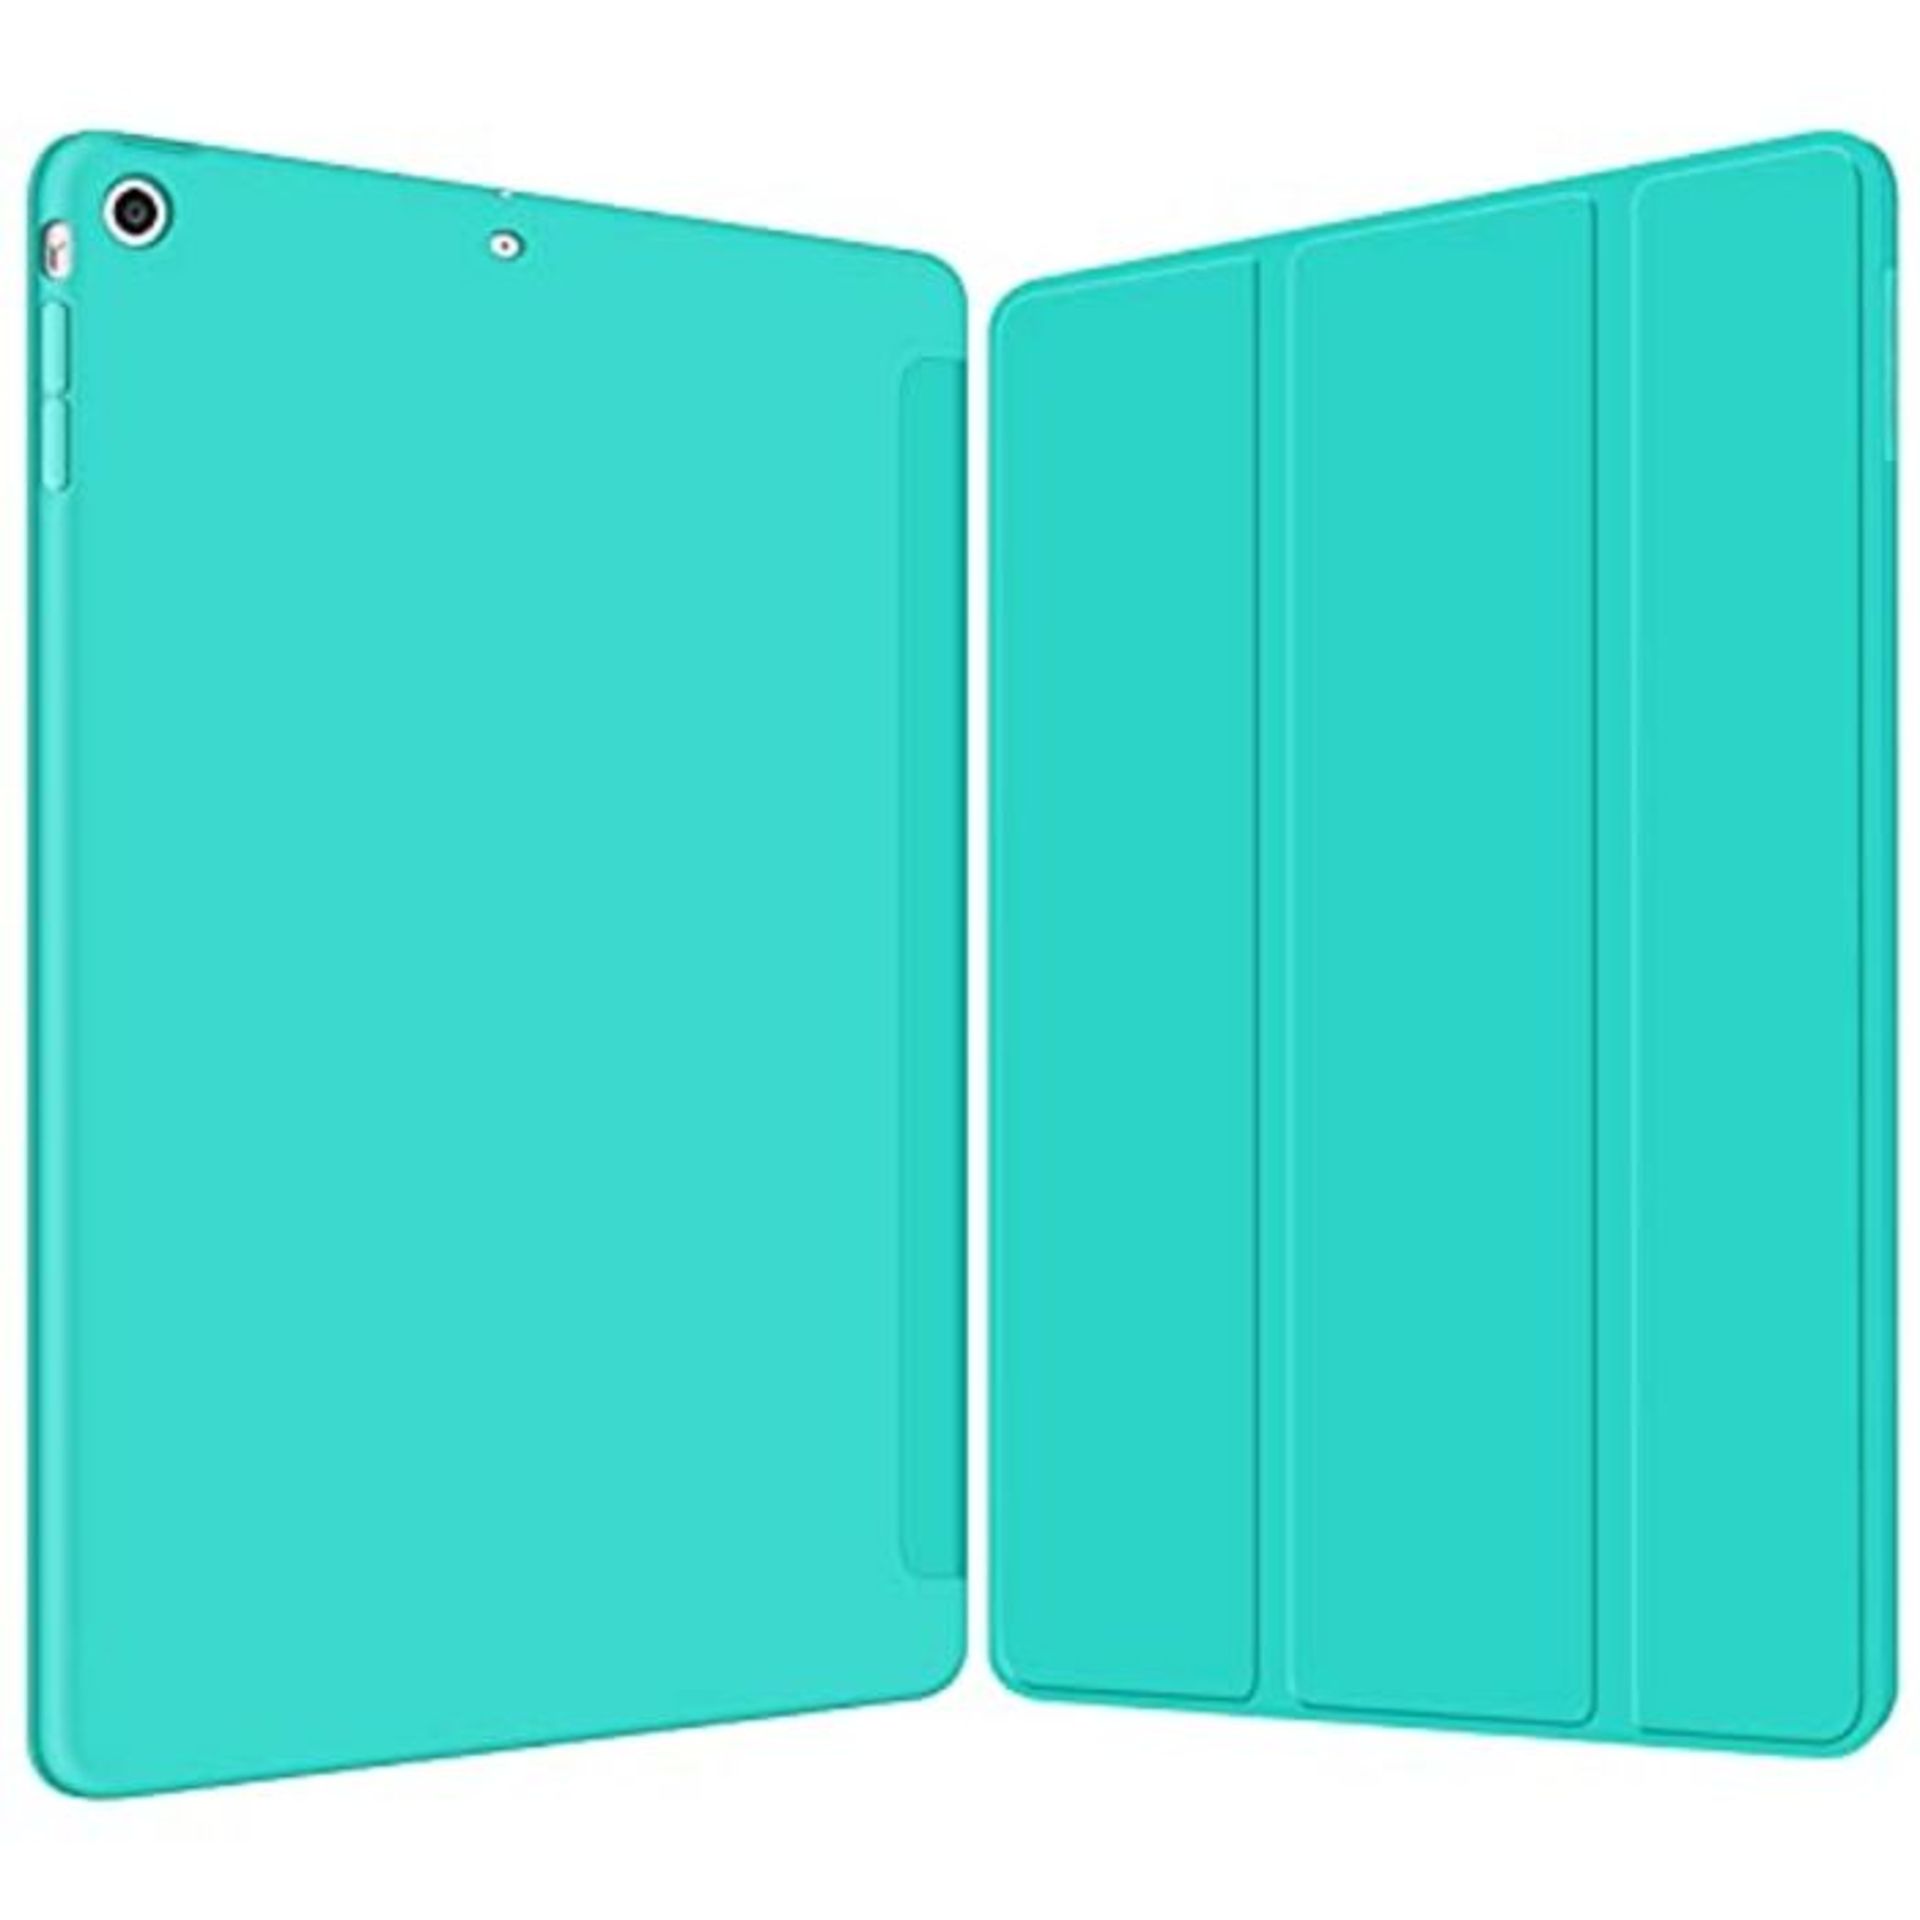 VAGHVEO iPad air Case, Ultra-slim Lightweight Stand Shell Protective Smart Case [Auto